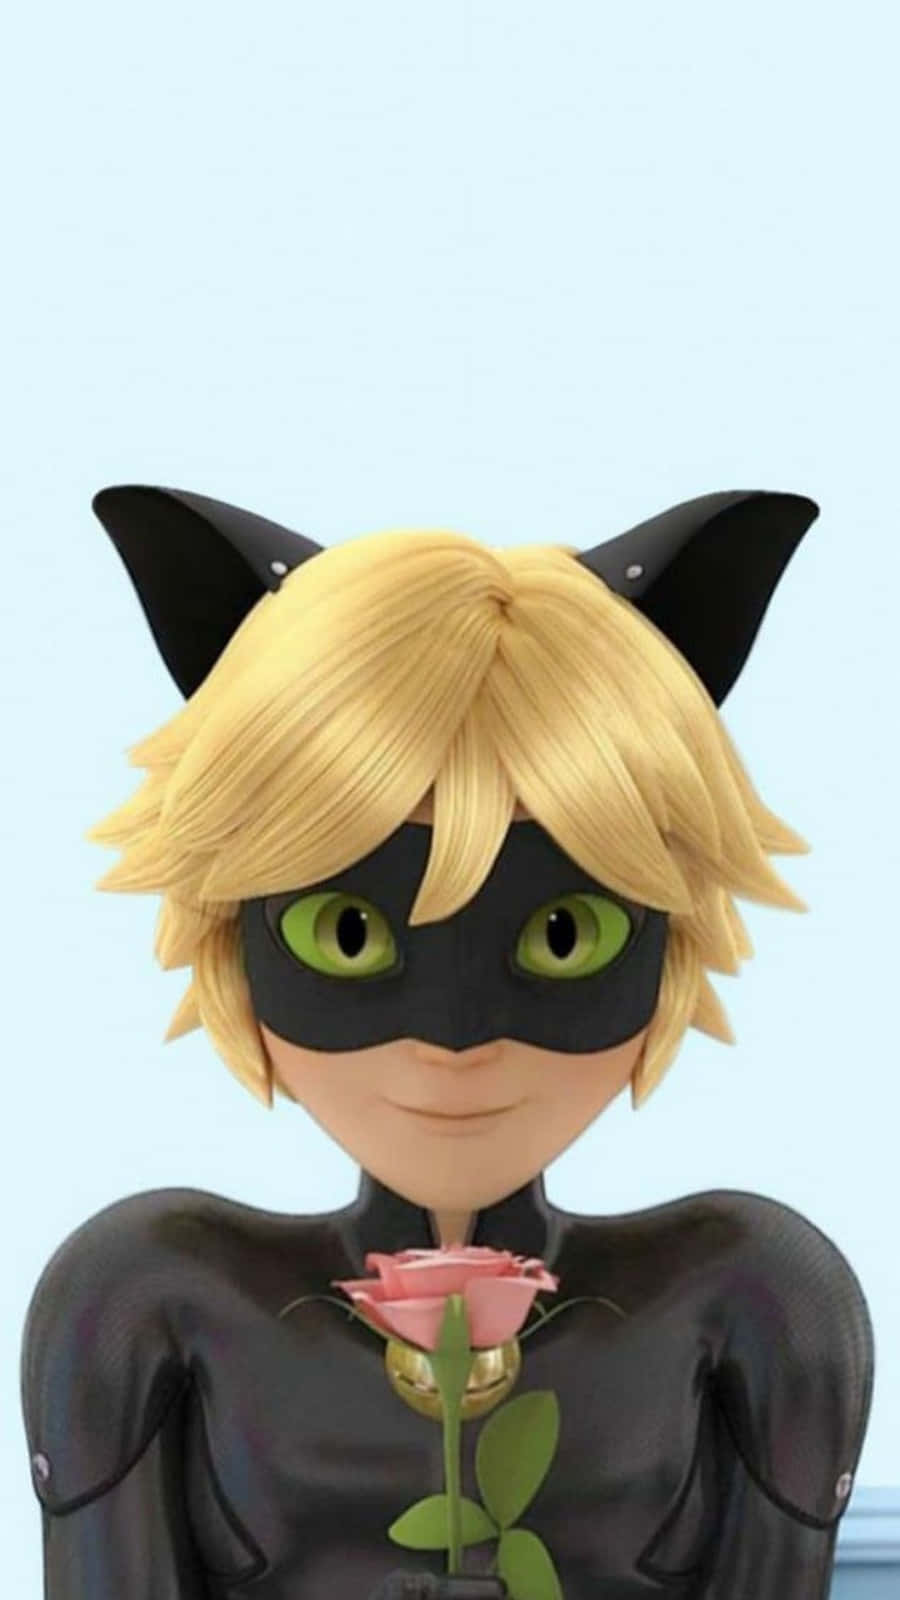 Save the day with Cat Noir